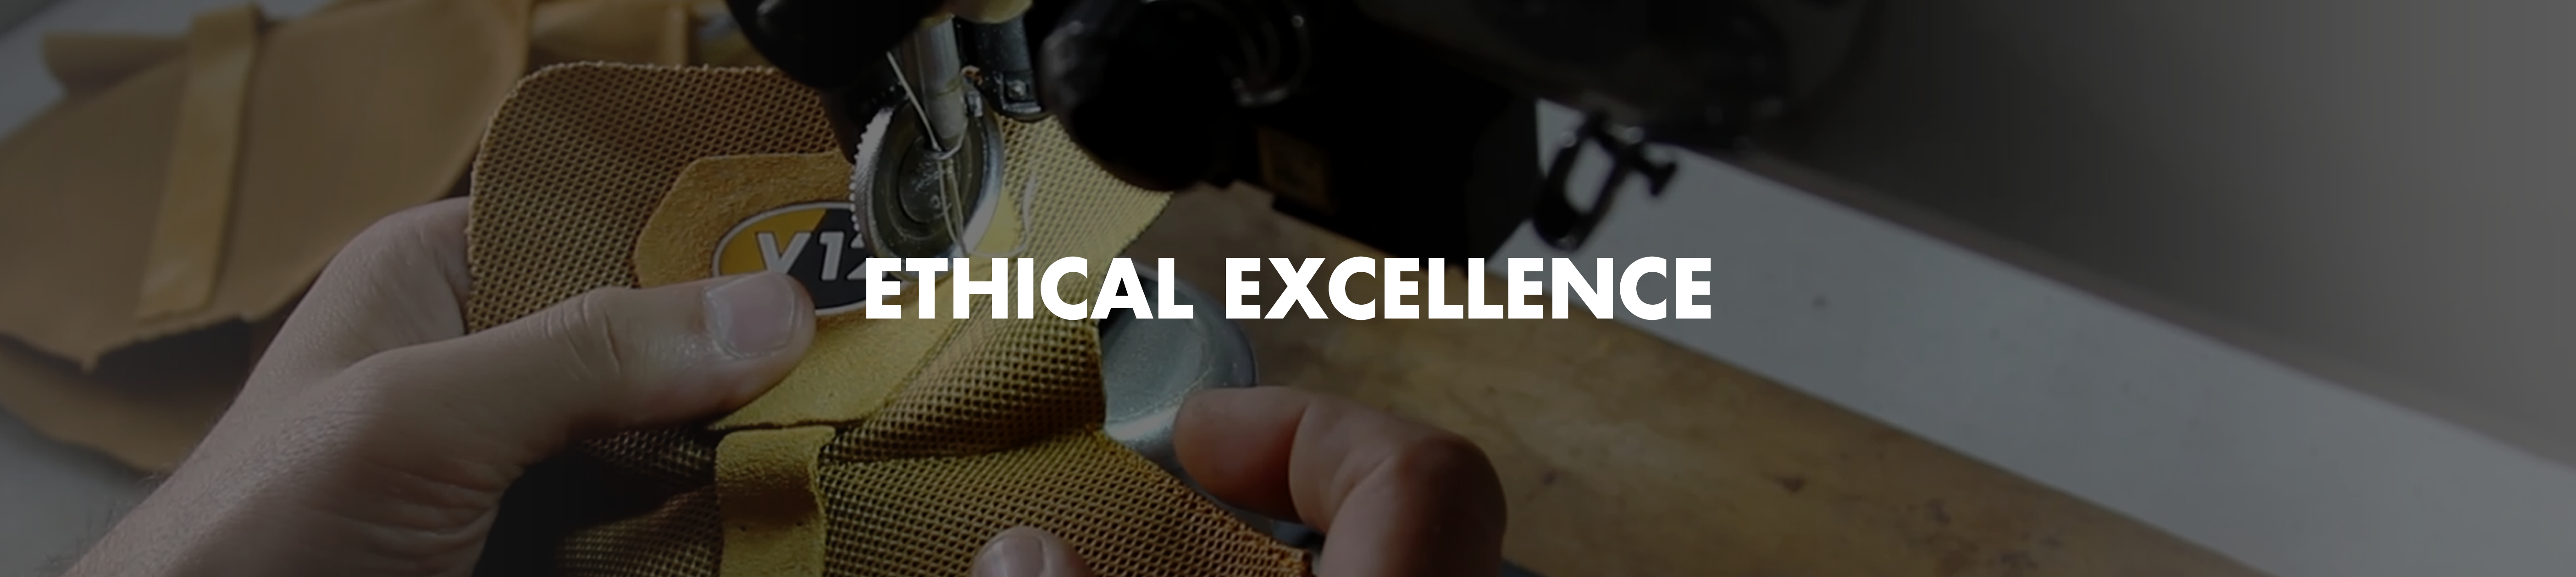 Ethical Excellence